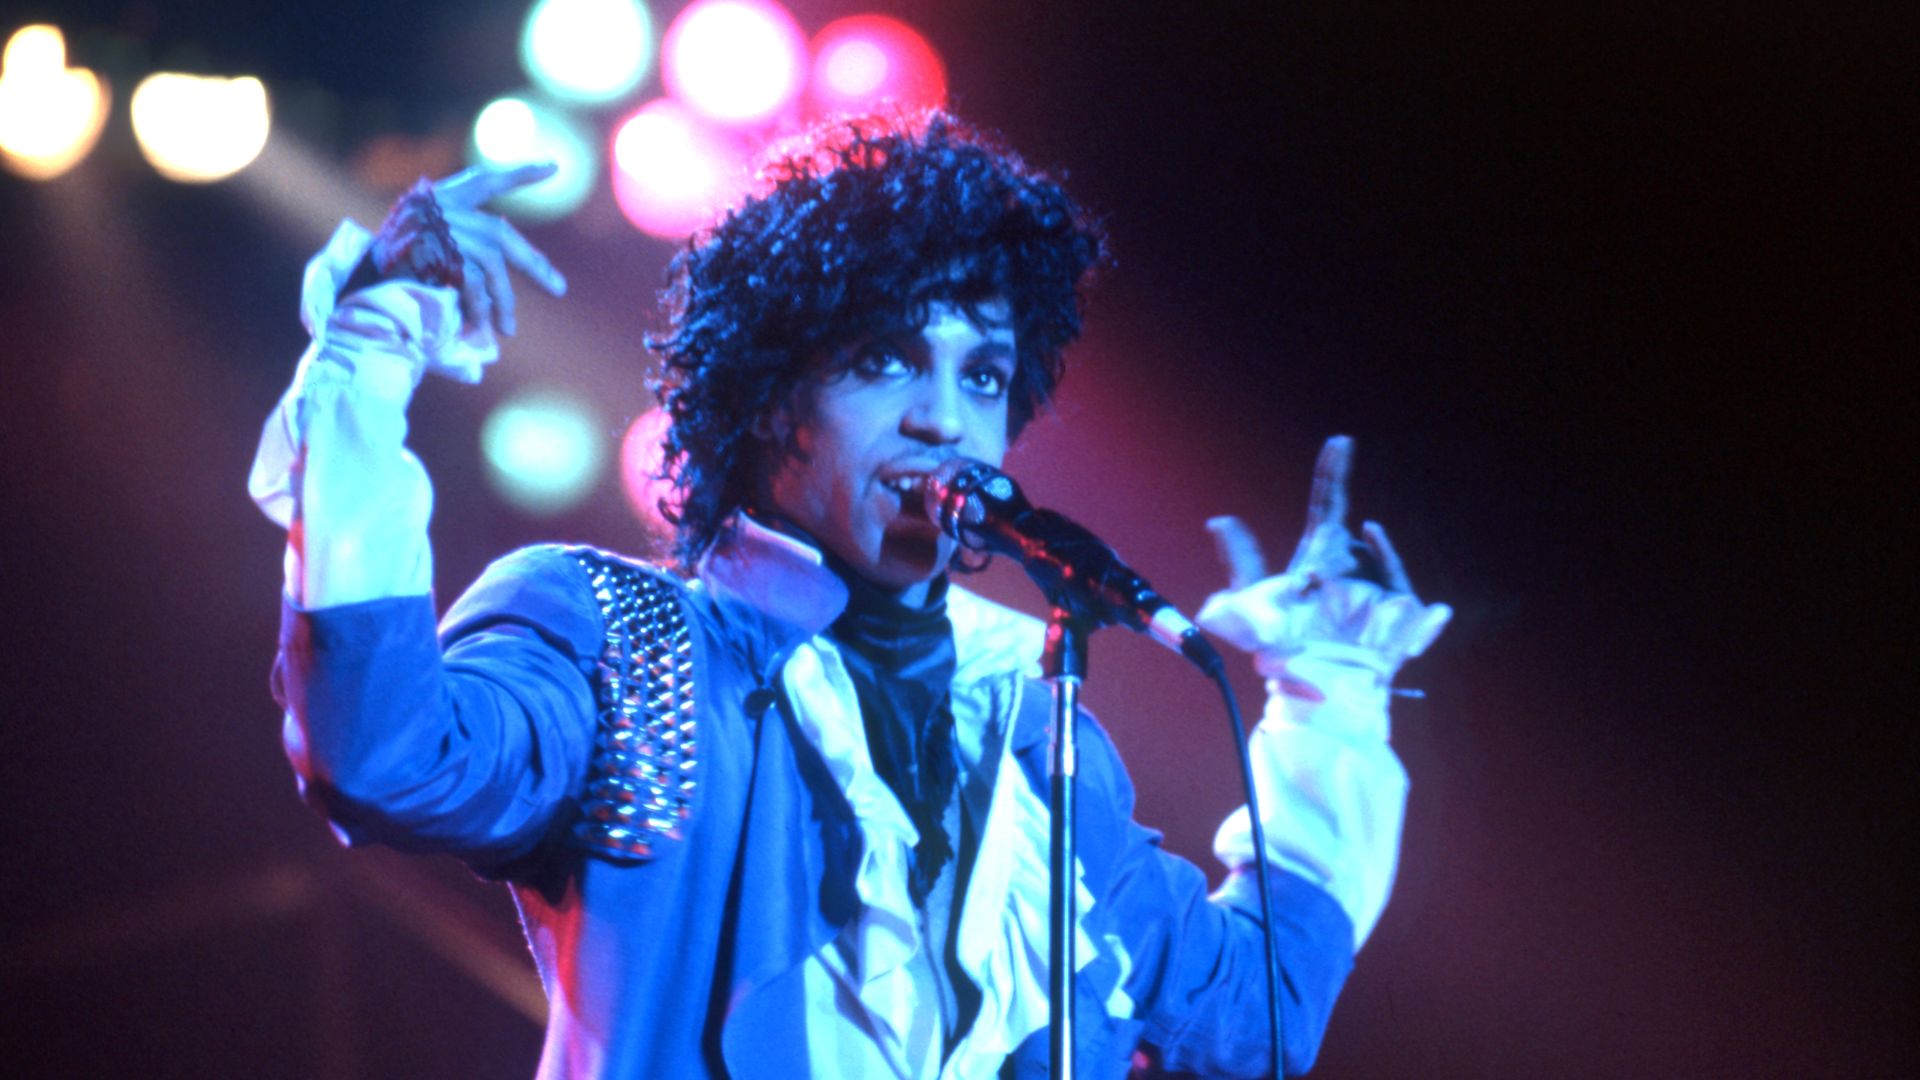 prince performs in a purple jacket